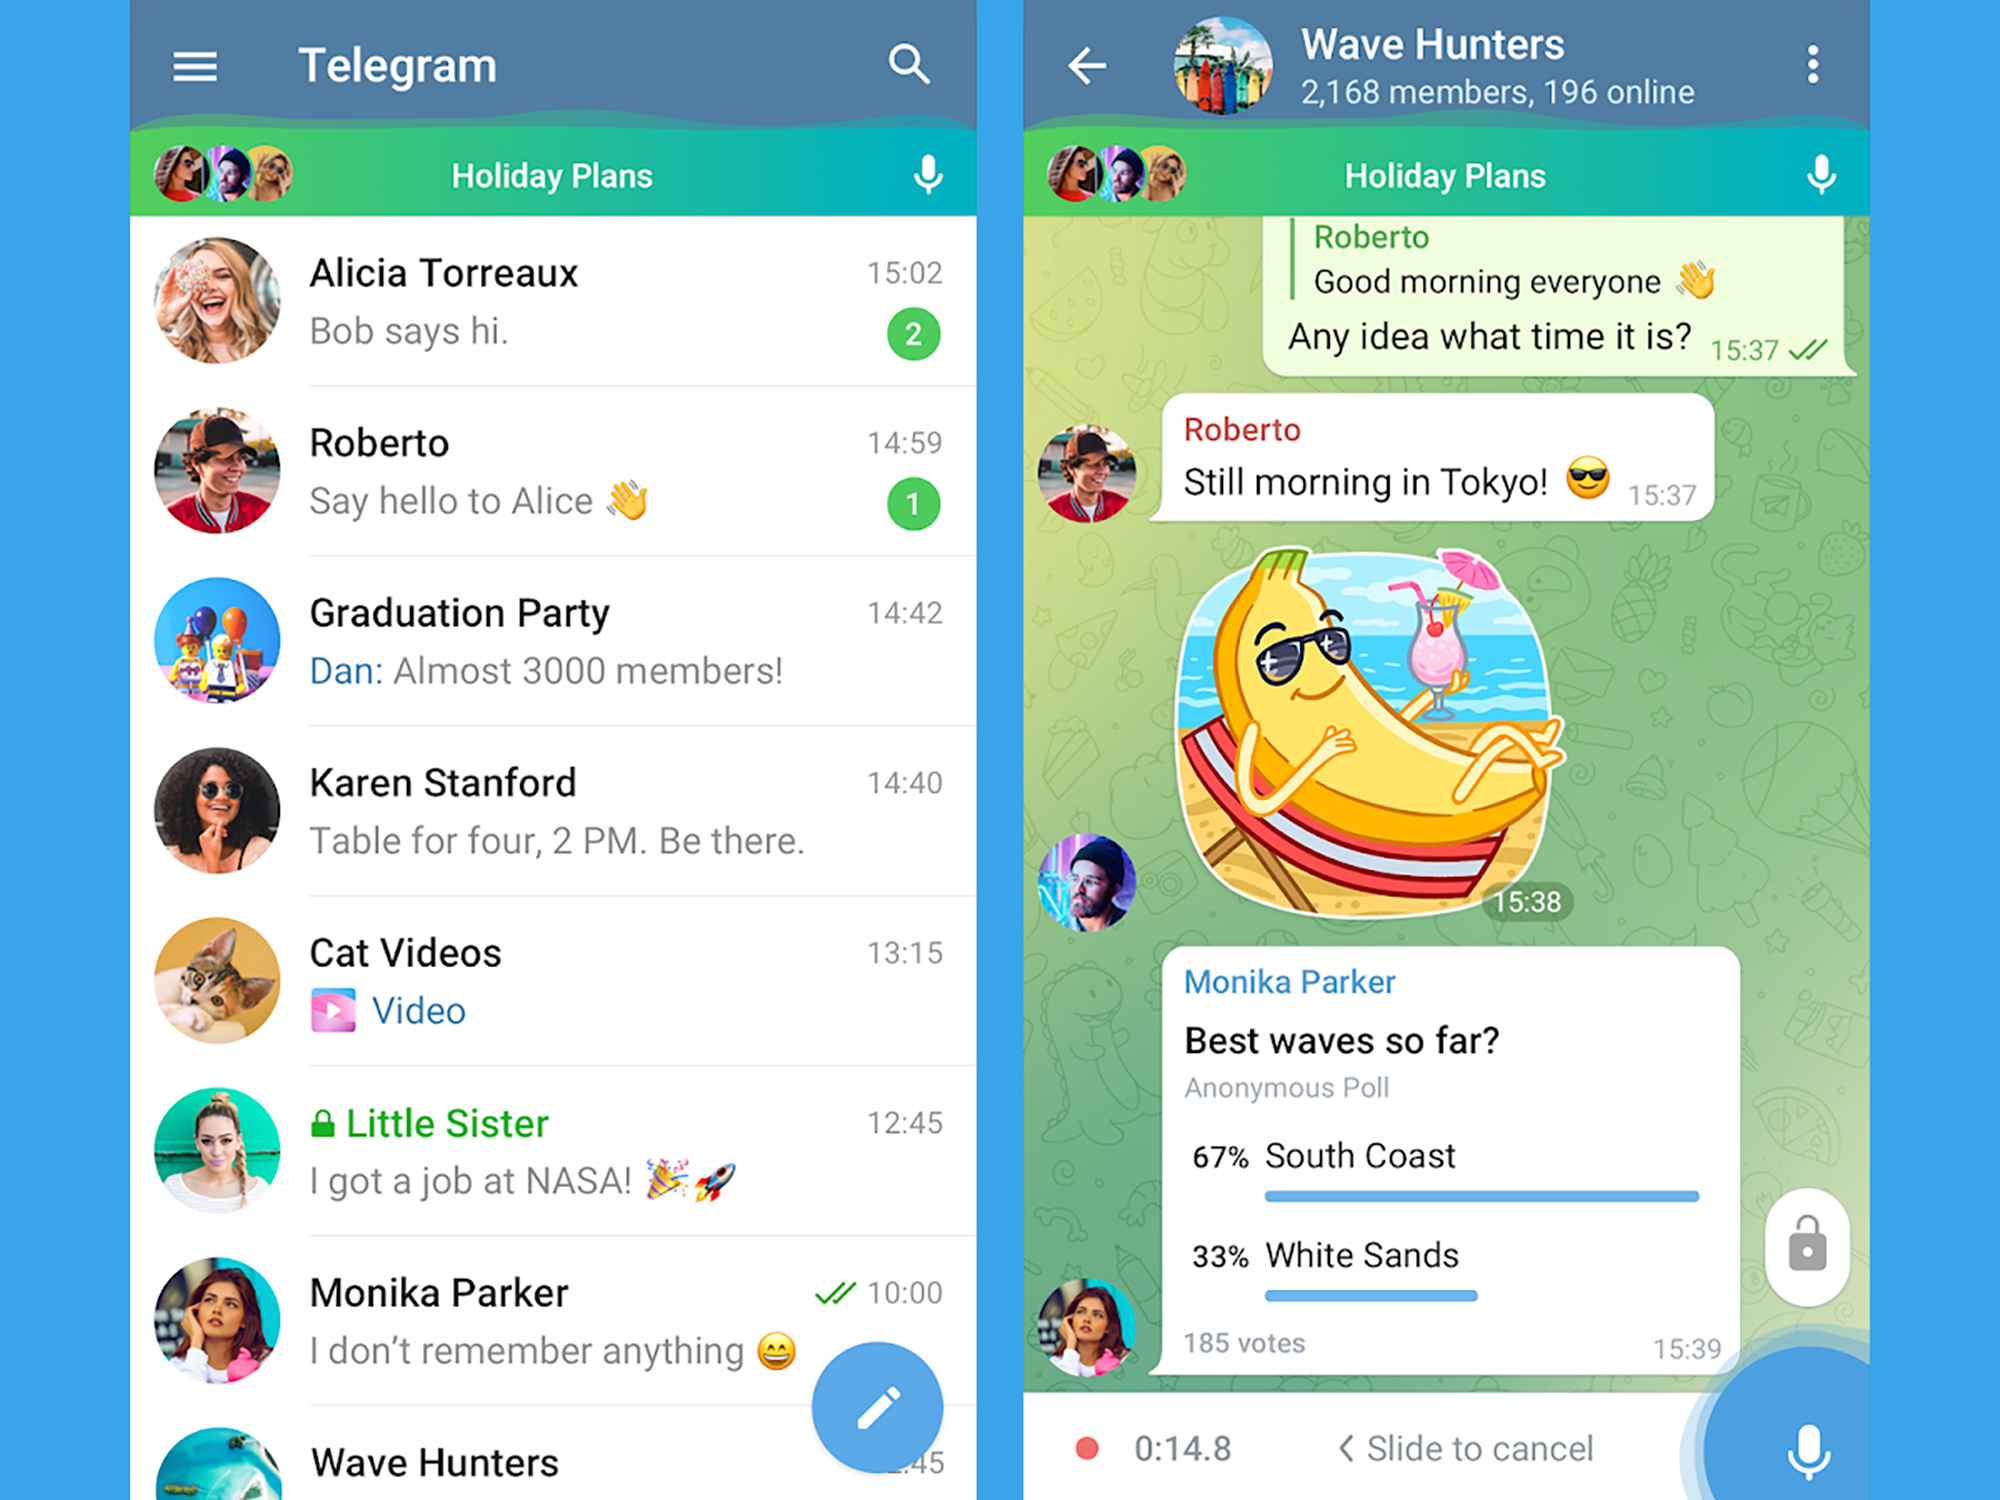 How to avoid spoilers in group chats, and 6 other great Telegram tips